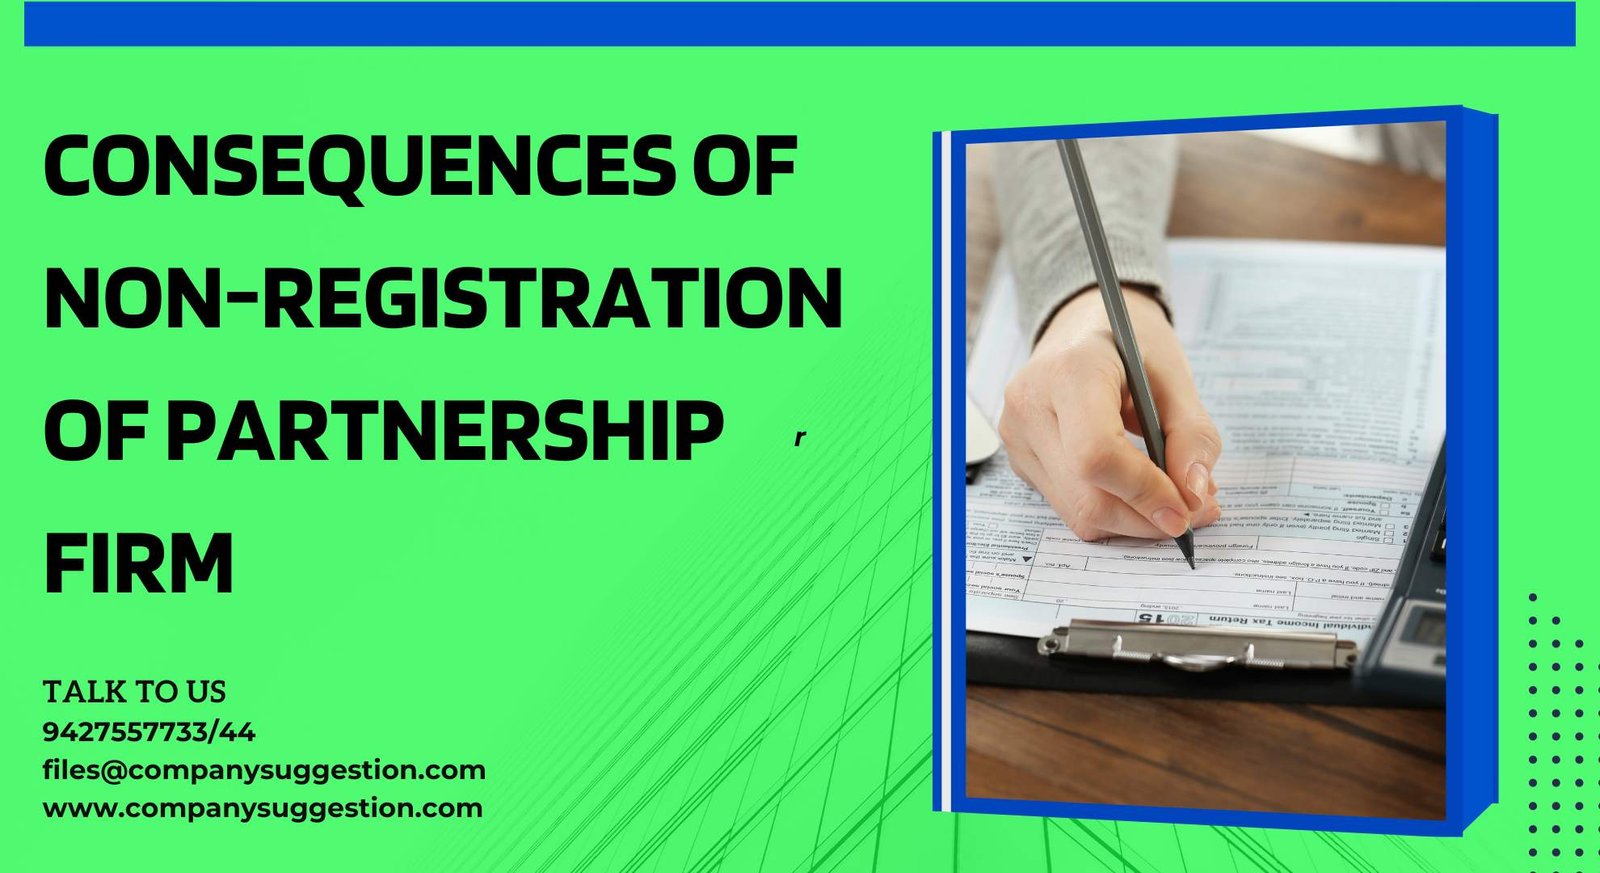 Consequences of Non-Registration of Partnership Firm